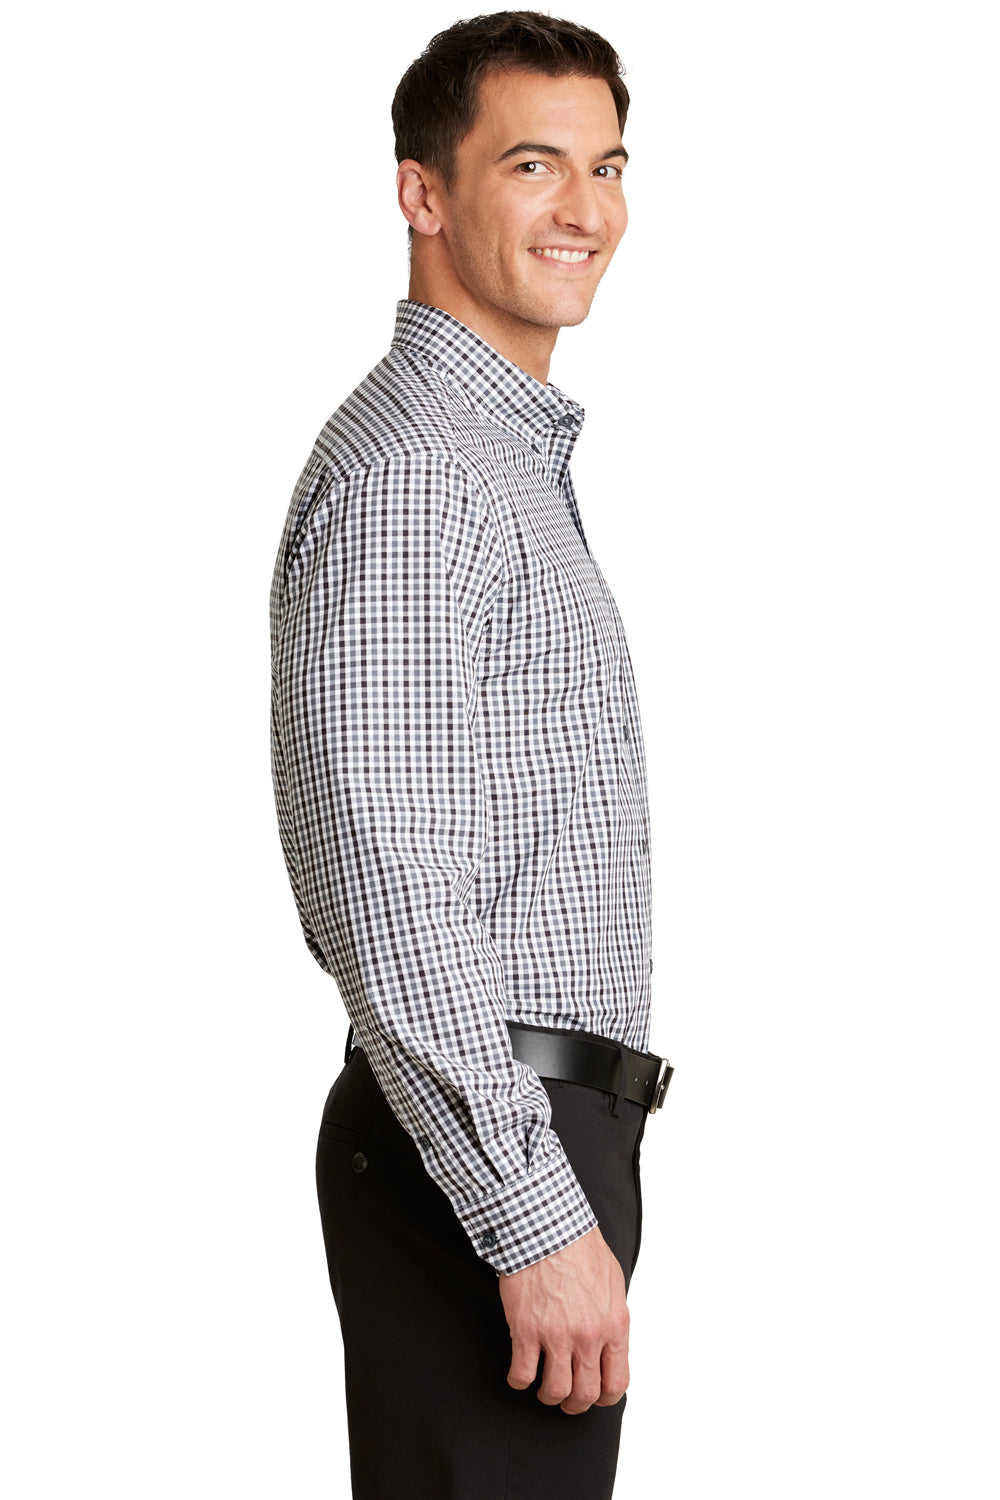 Port Authority S654 Mens Easy Care Wrinkle Resistant Long Sleeve Button Down Shirt w/ Pocket Black/Charcoal Grey Side